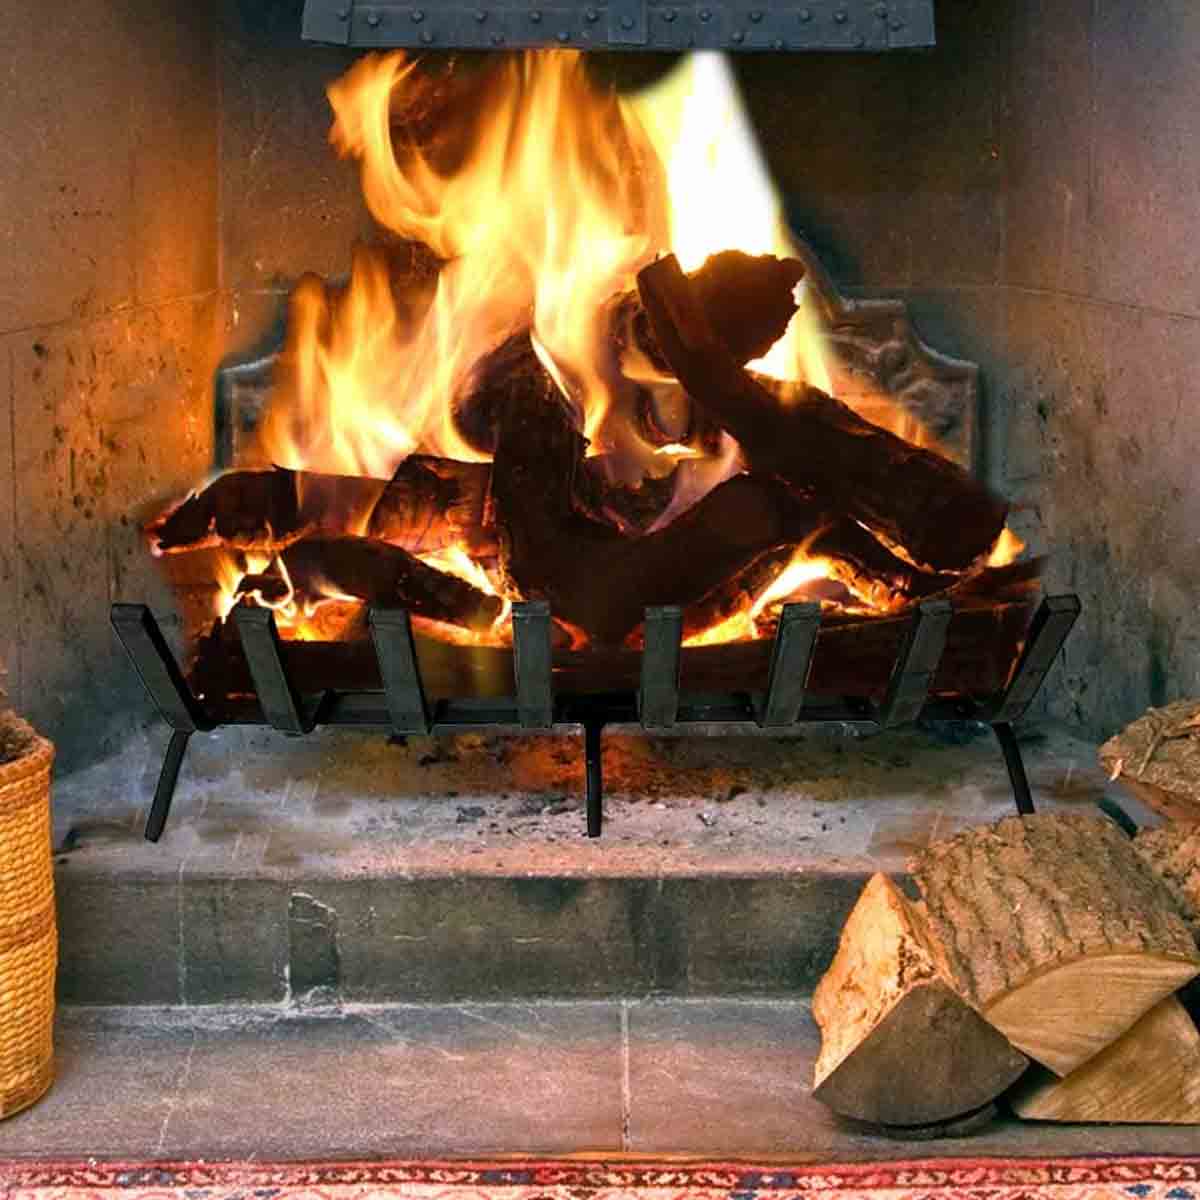 A Quick Word on Fireplace Grates